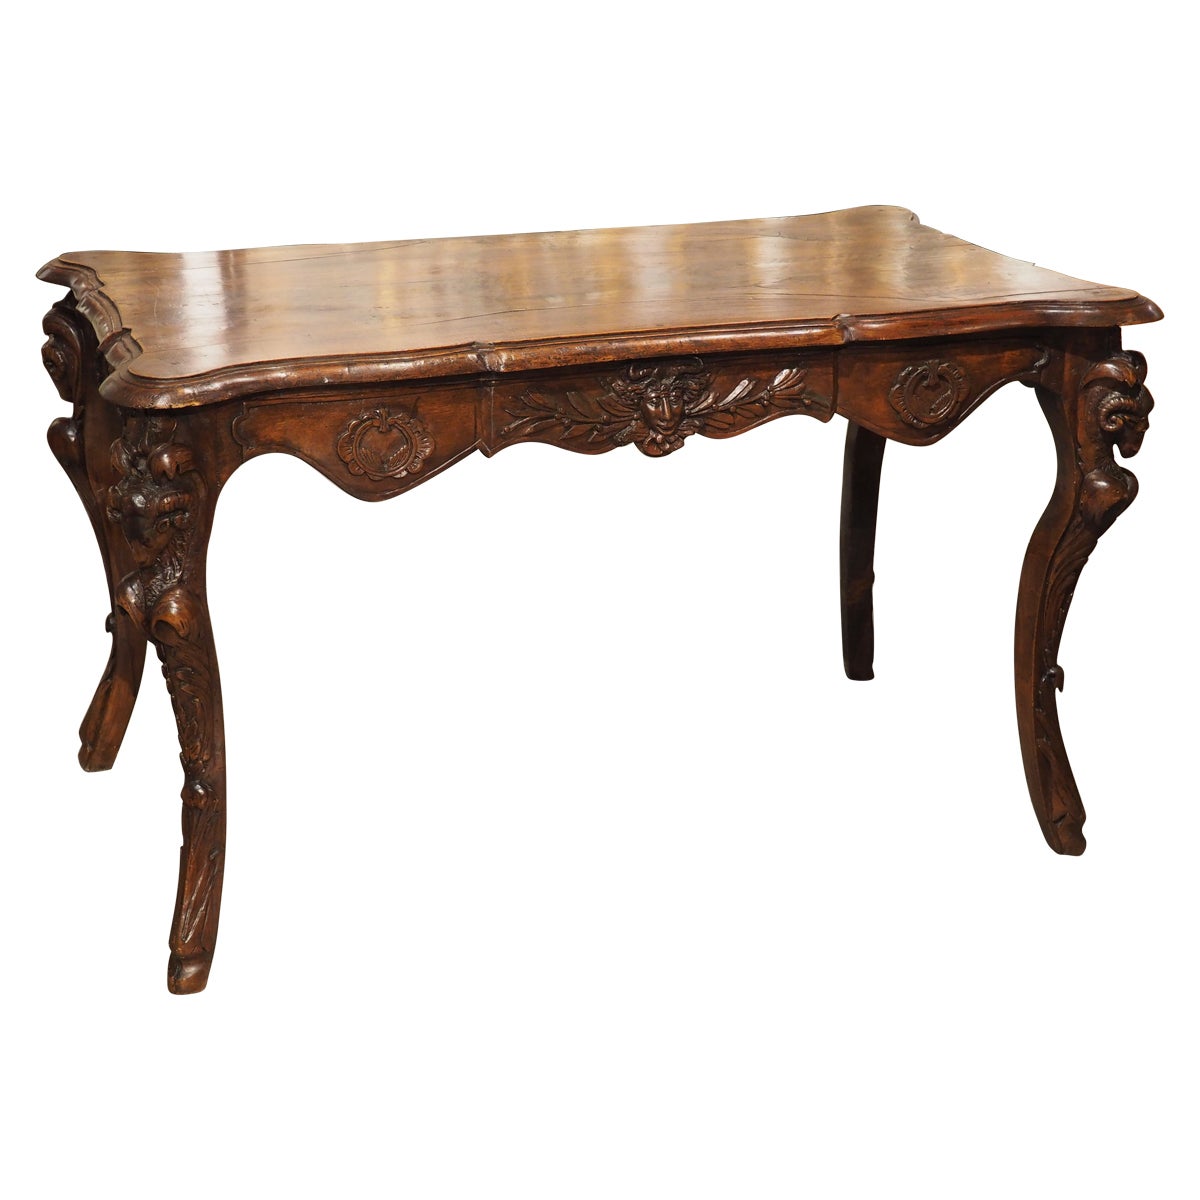 Circa 1870 French Walnut Wood Center Table with Rams' Heads and Fleur De Lys